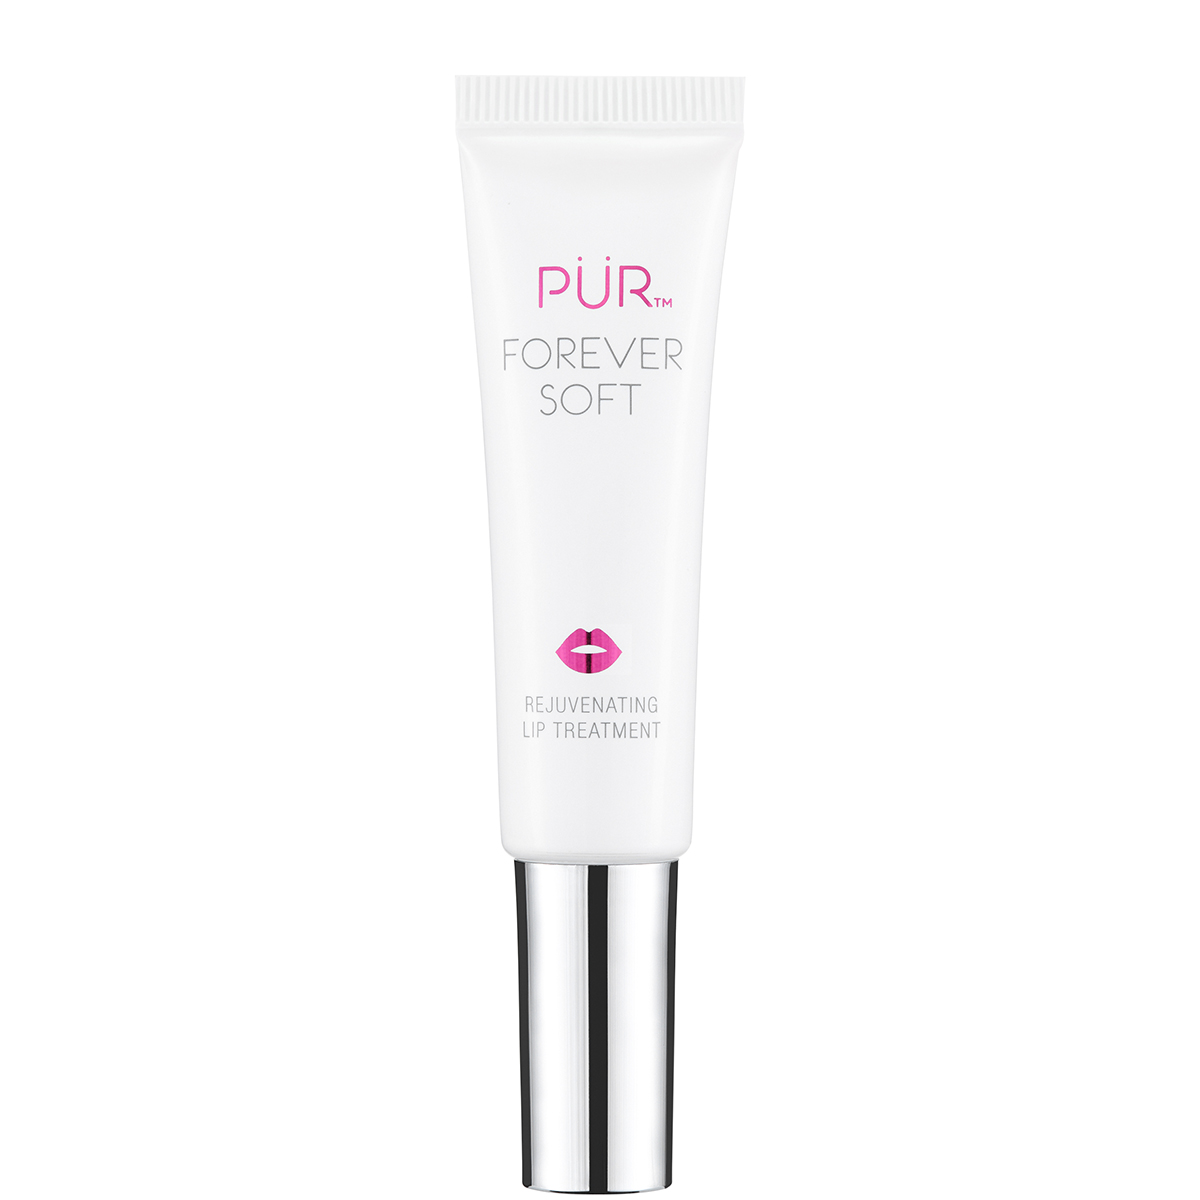 Pur Forever Soft Lip Treatment